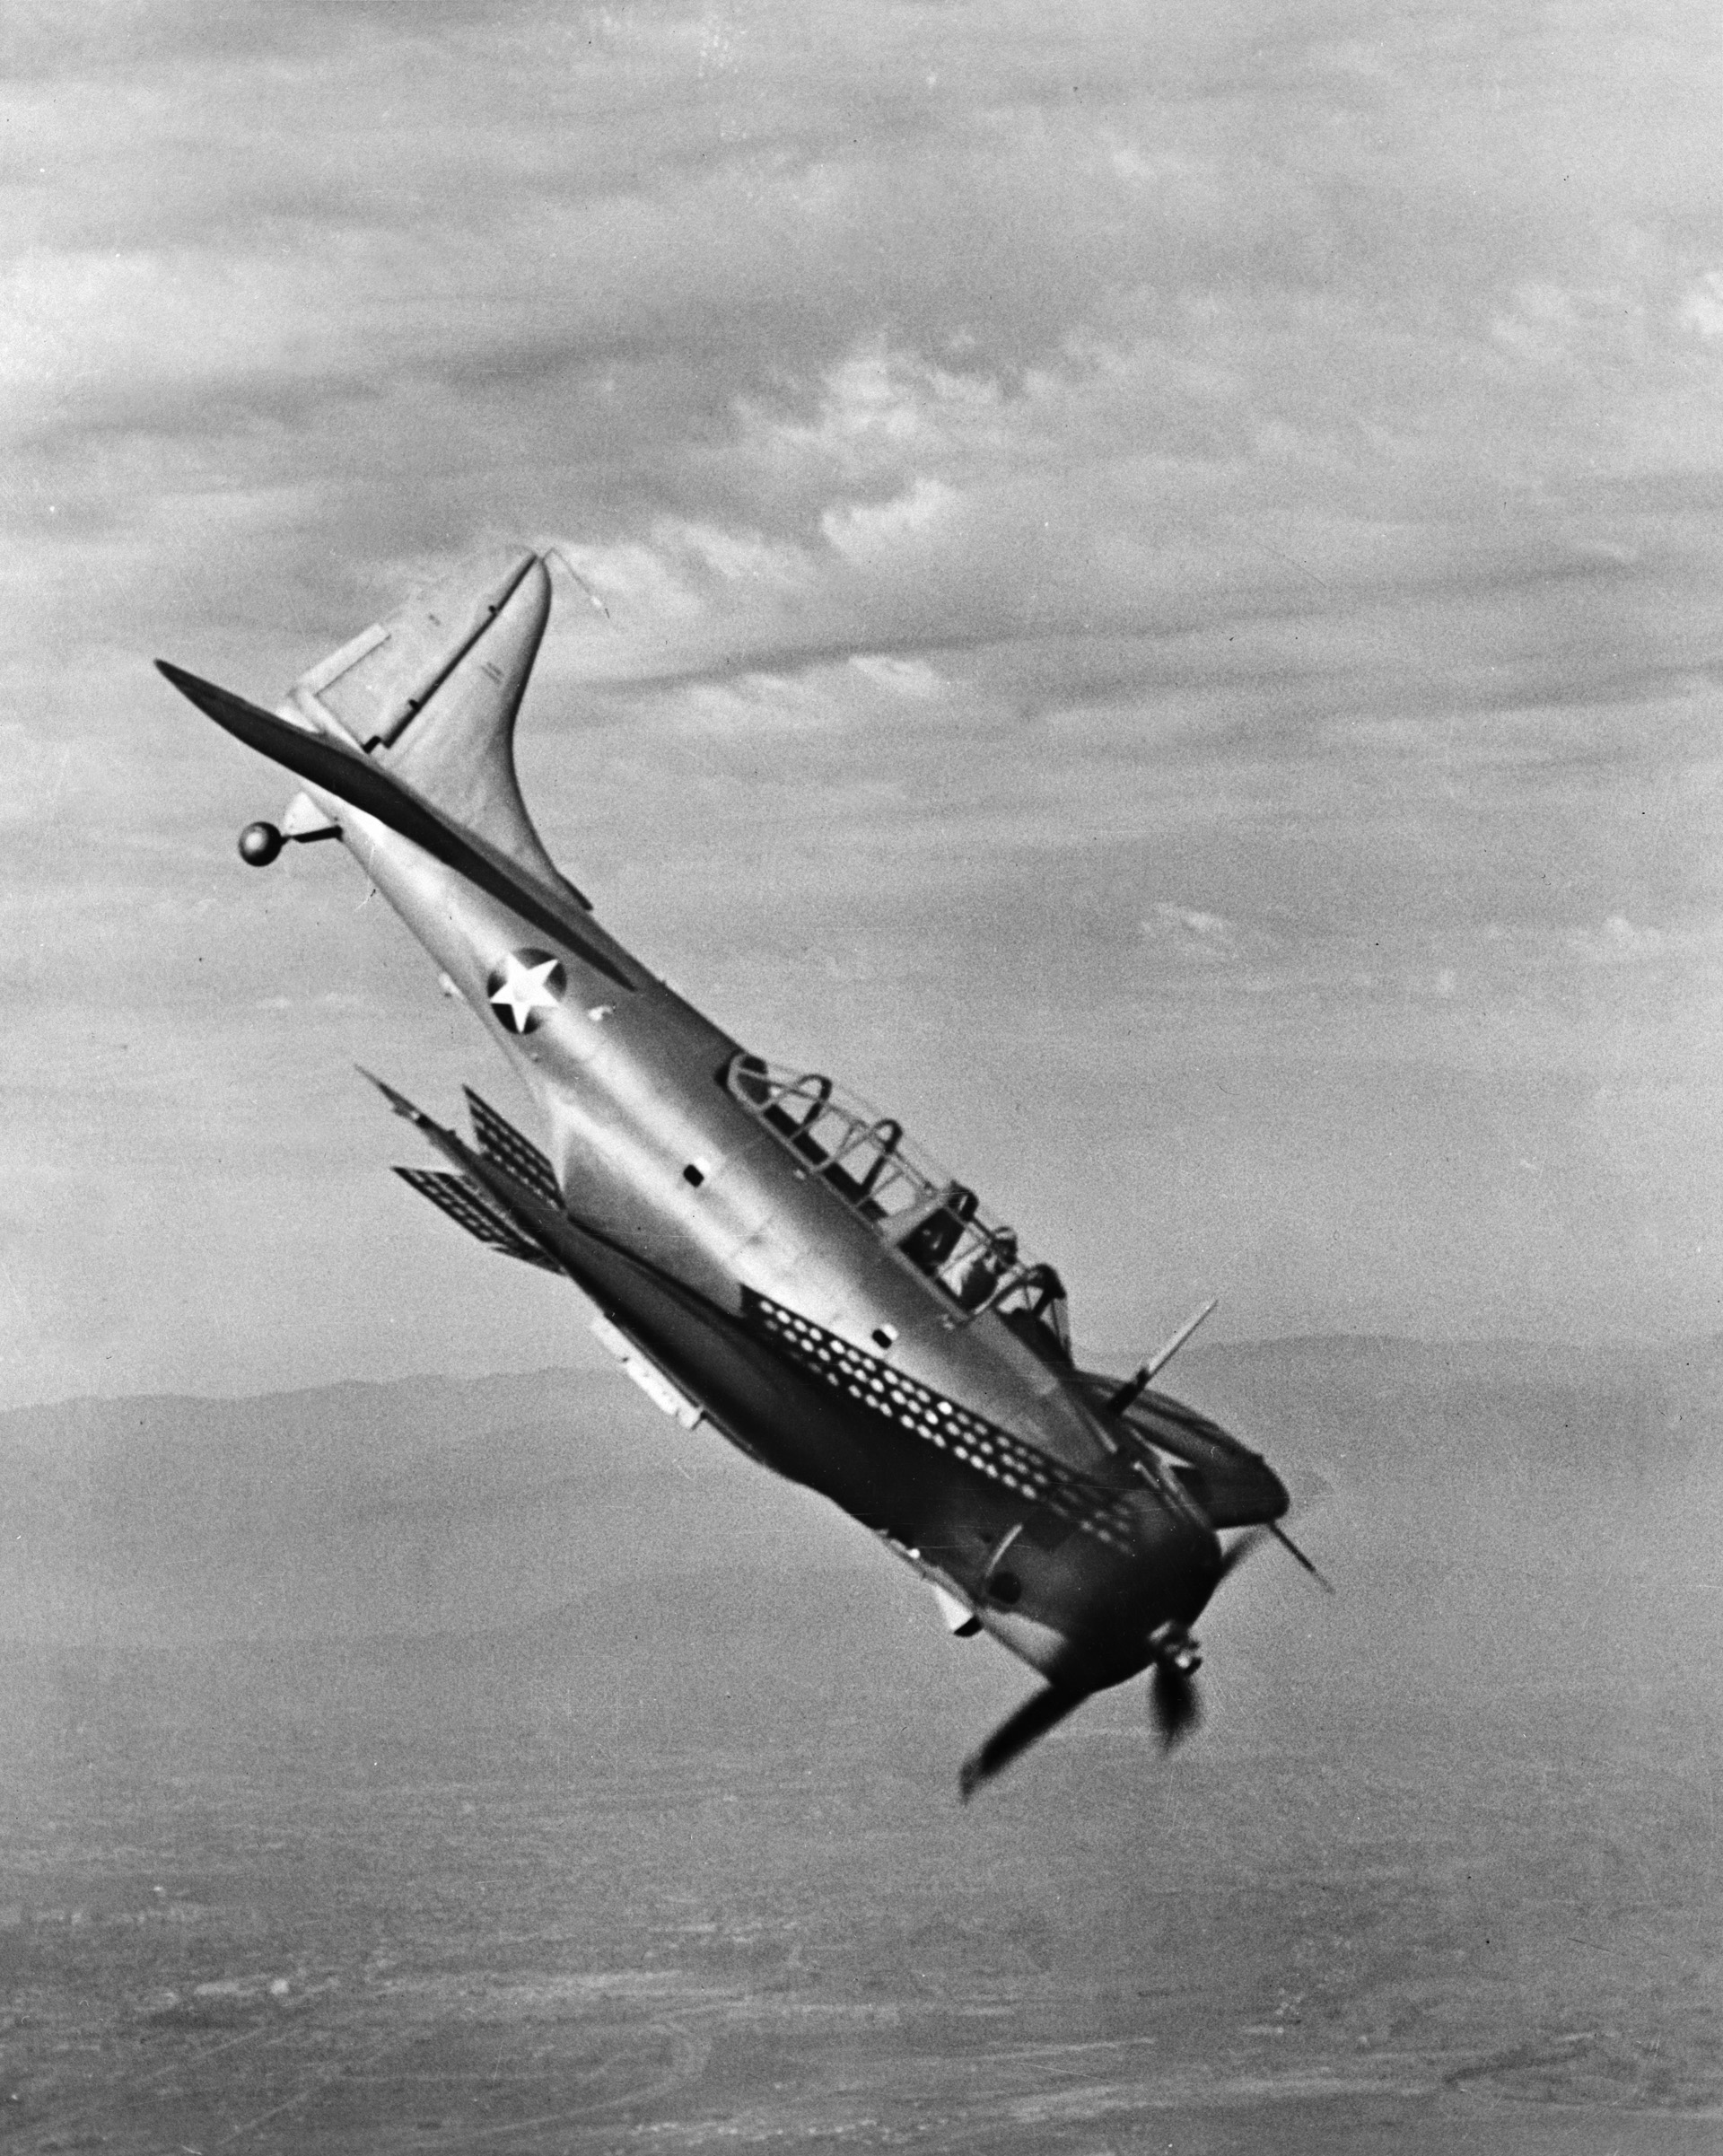 A Douglas A-24 Banshee dive bomber begins a steep dive during training exercises. The 27th Bomb Group flew worn- out Banshees during its service. Note the dive brakes.